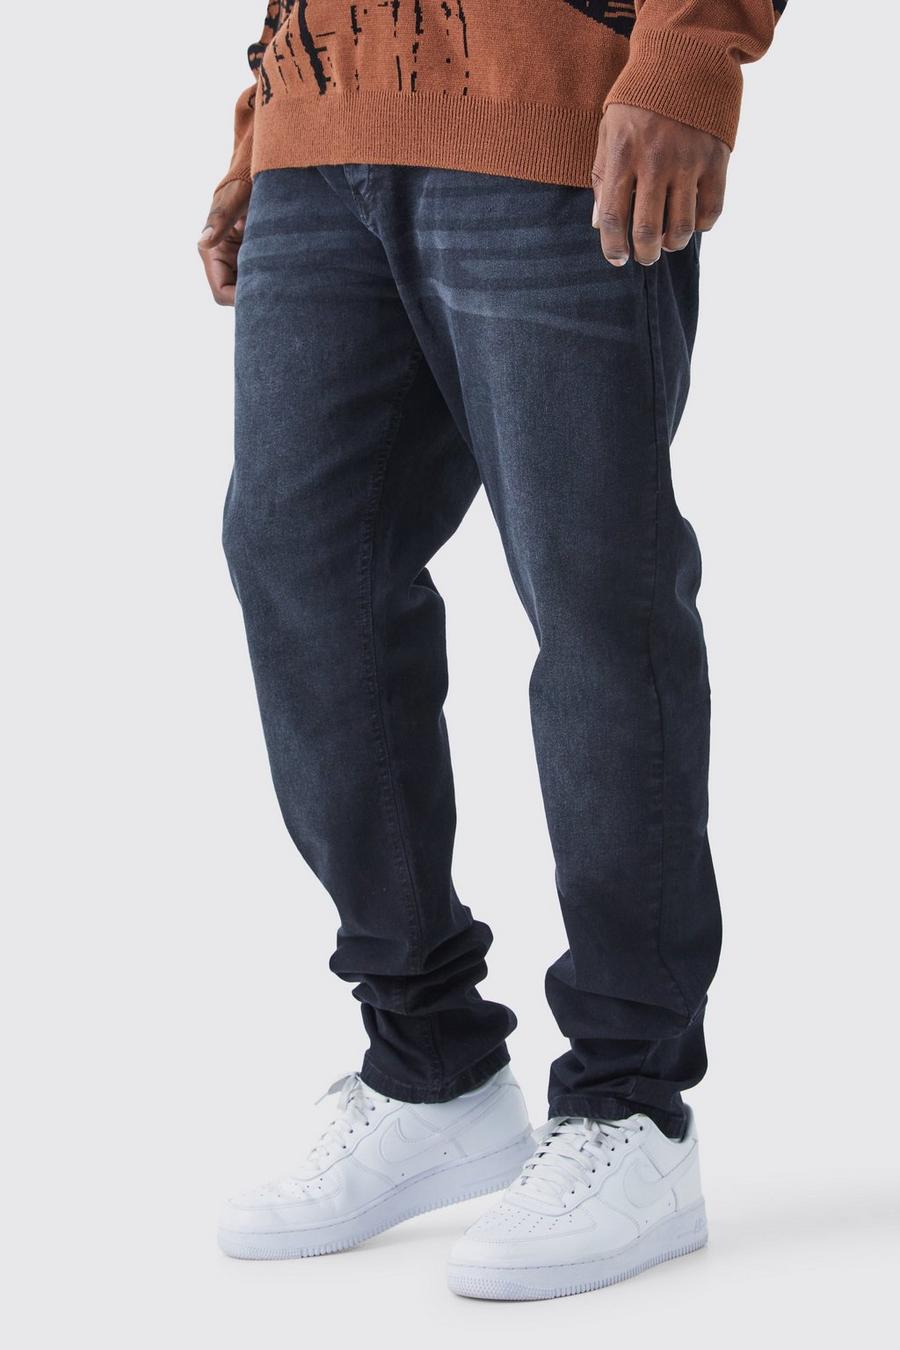 Washed black Plus Stacked Stretch Skinny Jeans